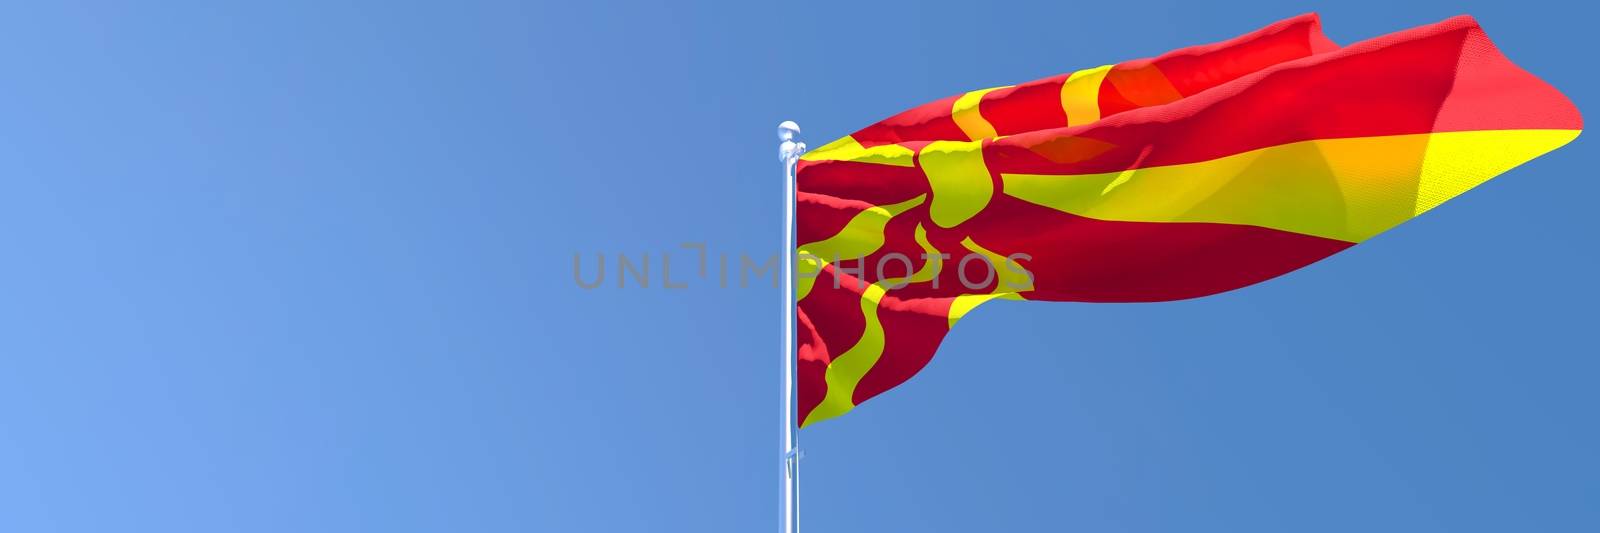 3D rendering of the national flag of Macedonia waving in the wind against a blue sky